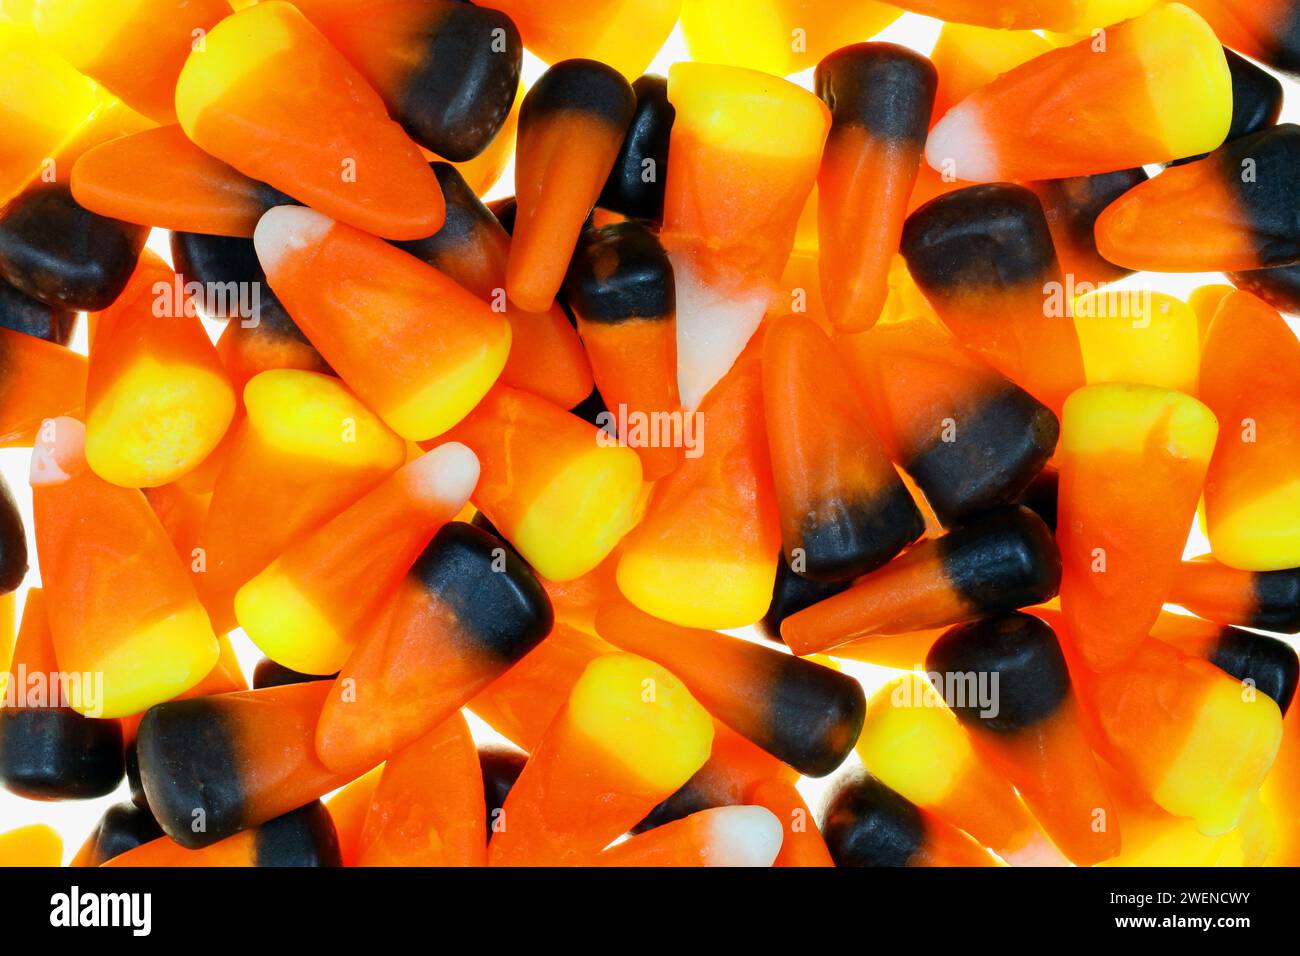 Candy Corn background close up image, orange, brown, white, yellow, back lighted, glowing. Stock Photo